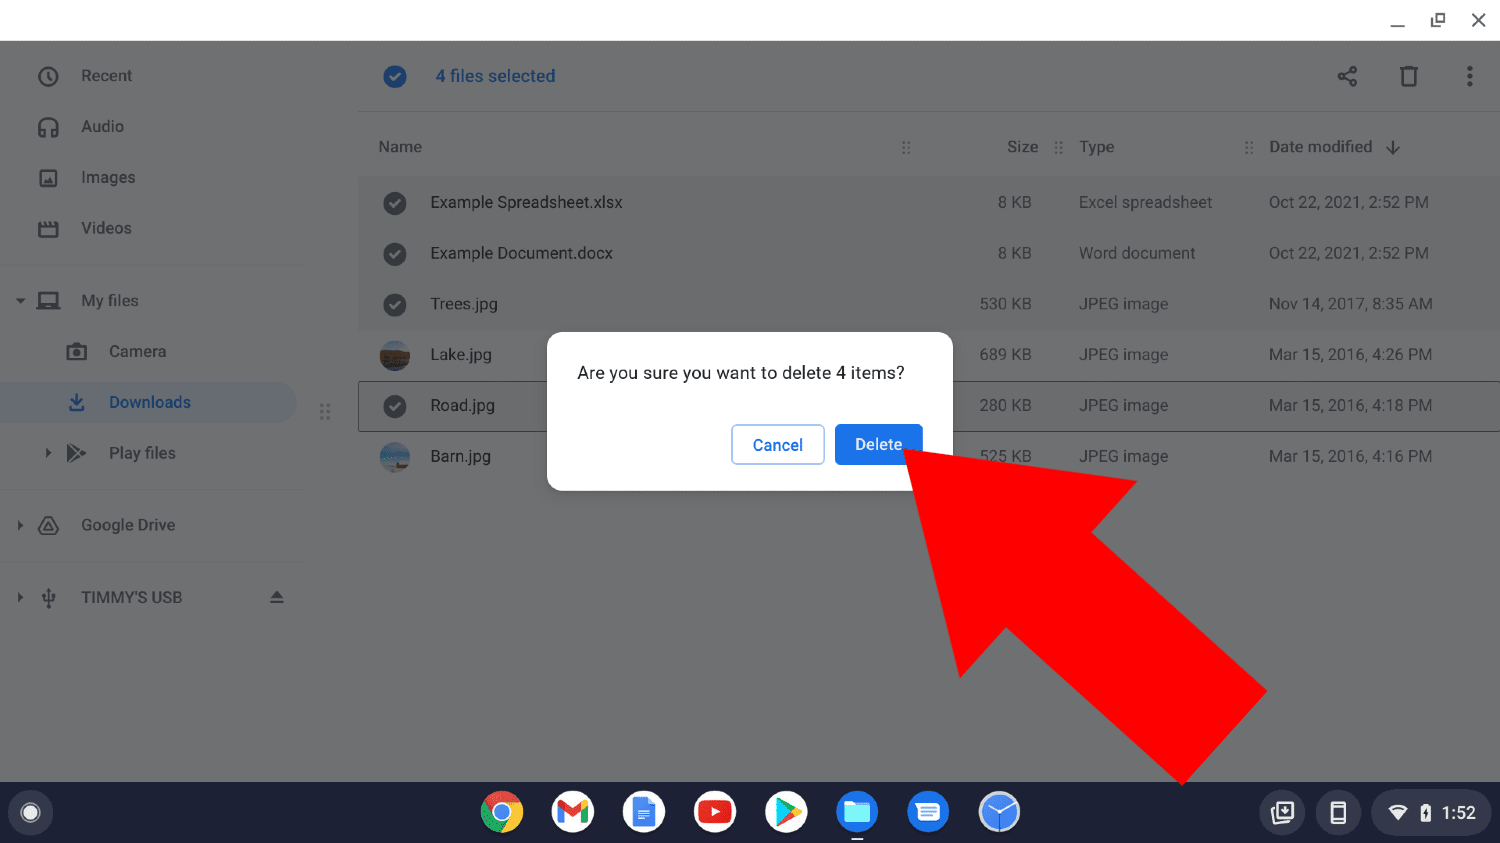 how to eject usb from chromebook